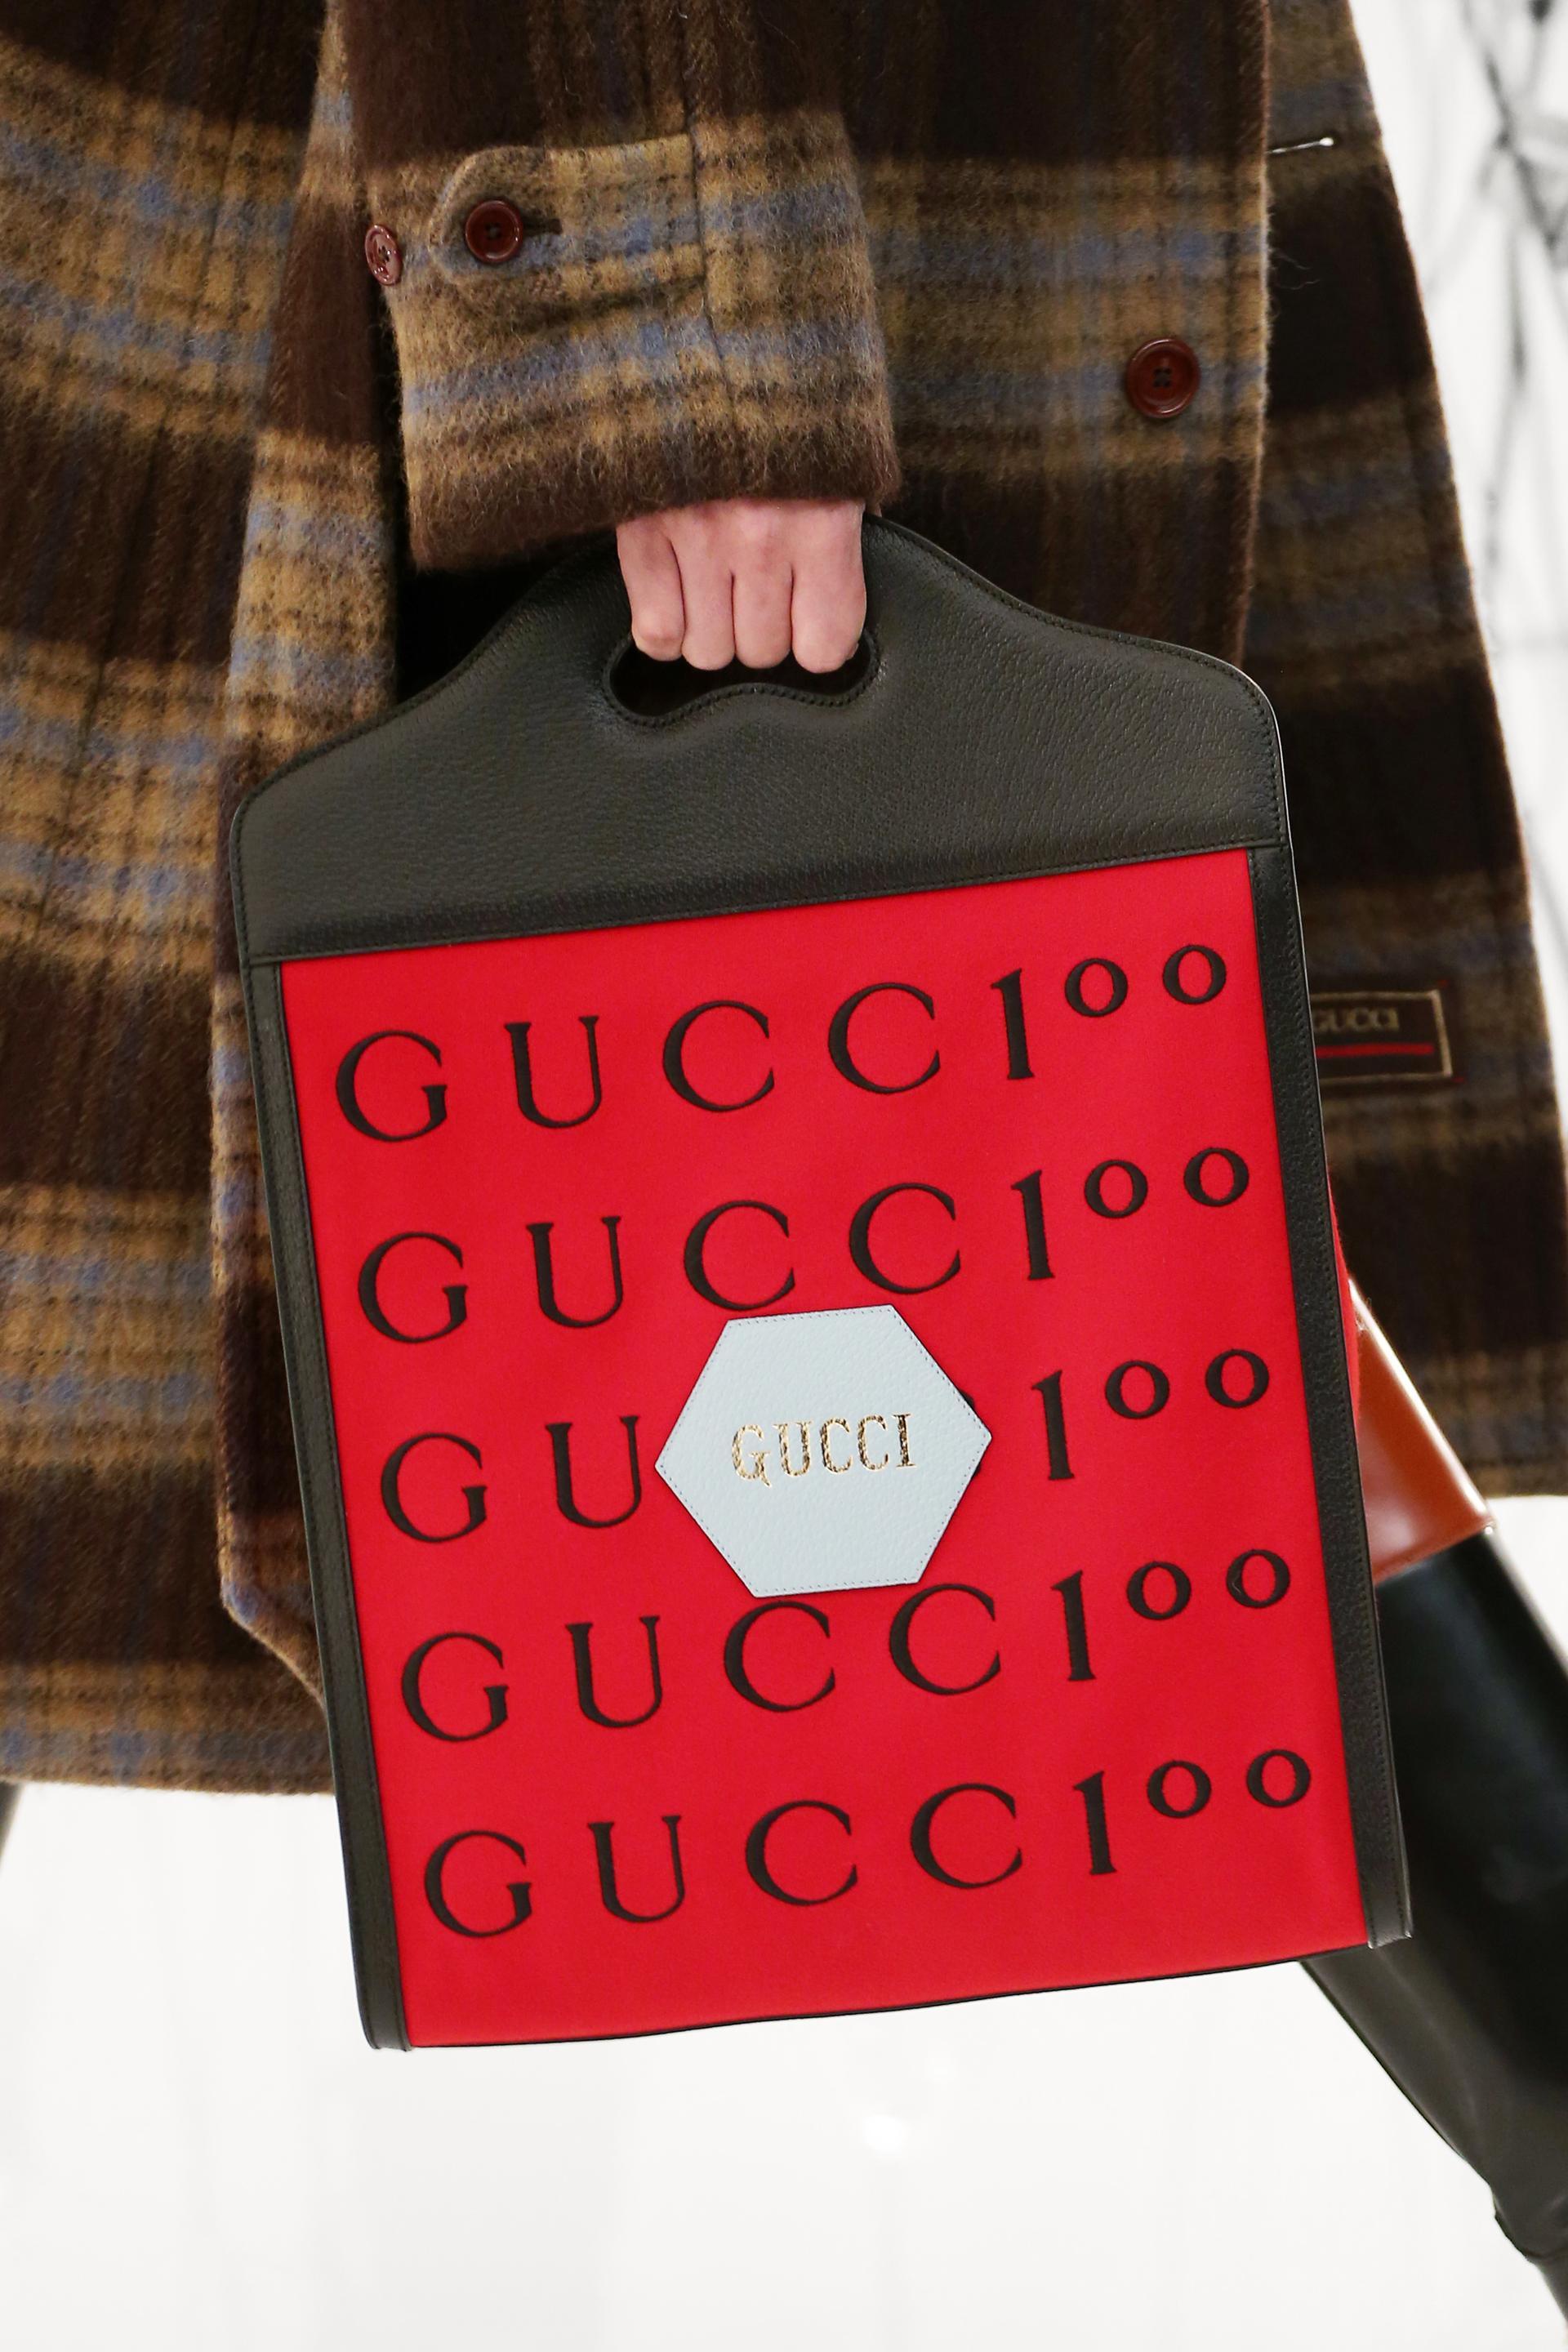 Gucci celebrating her 100th anniversary in 2021 through a special